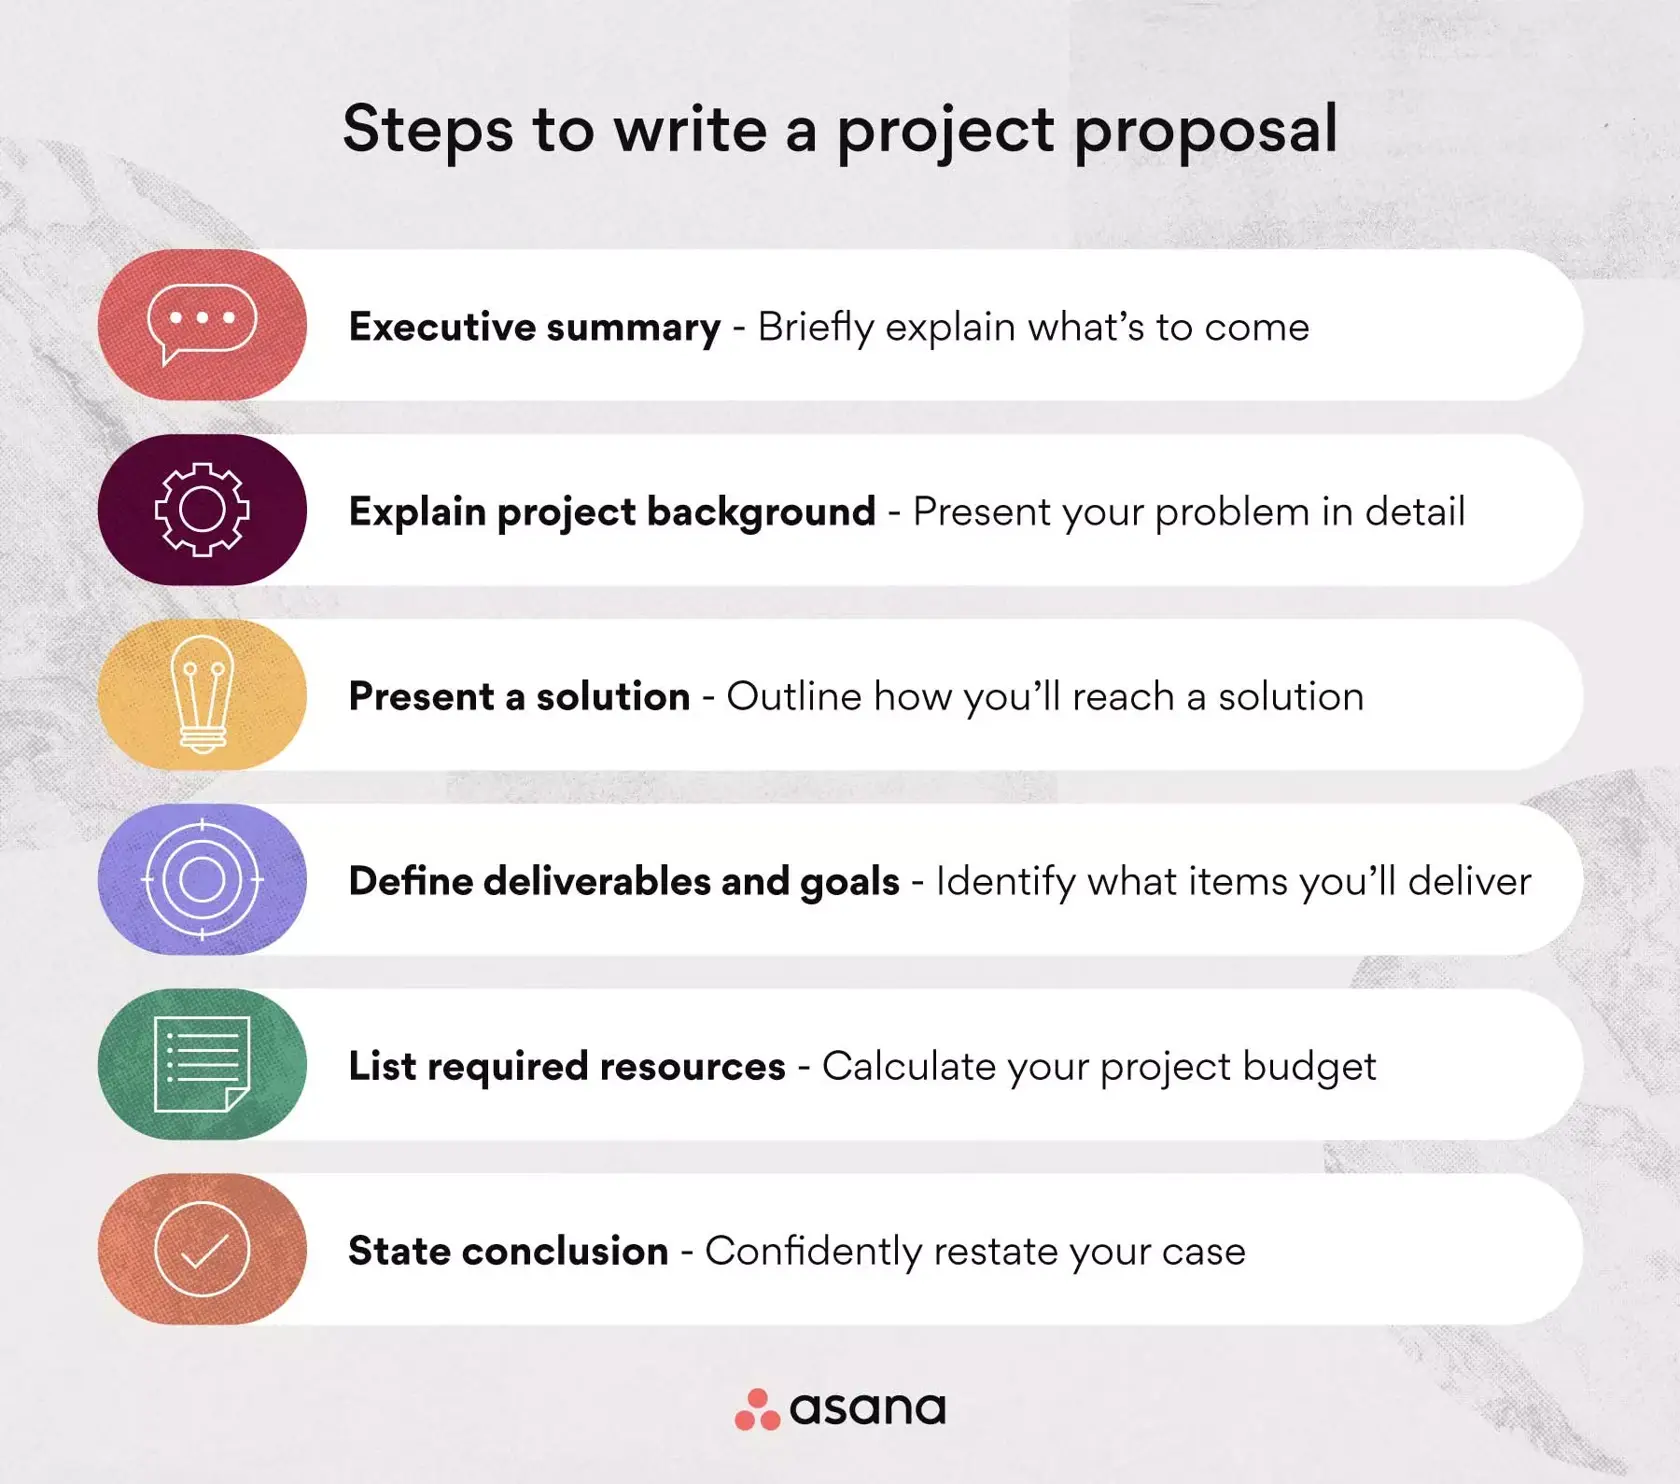 [inline illustration] How to write a project proposal (infographic)